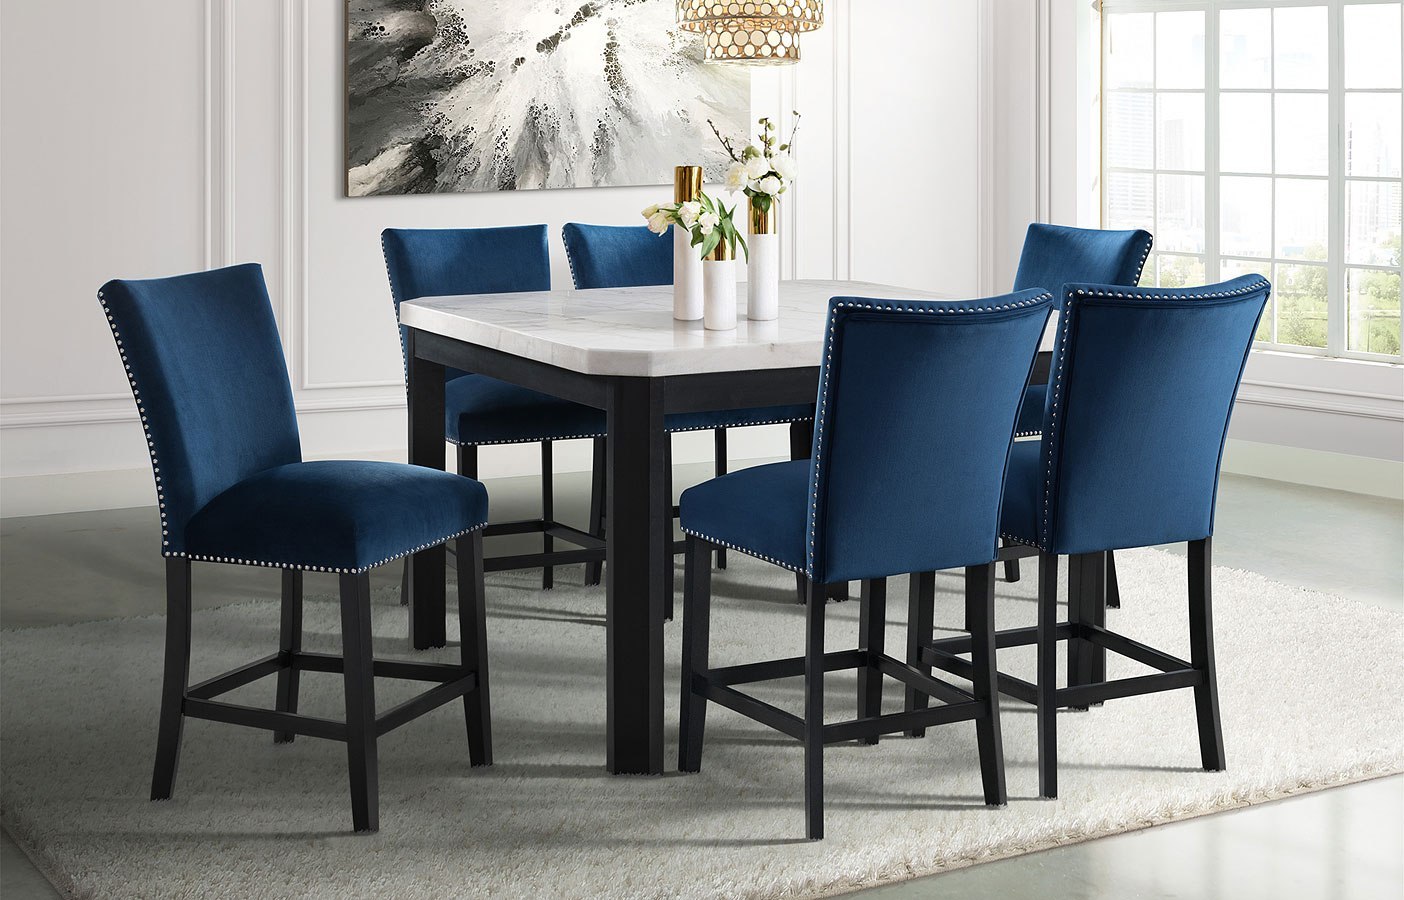 Francesca Counter Height Dining Room Set w/ Blue Chairs by Elements Furniture FurniturePick